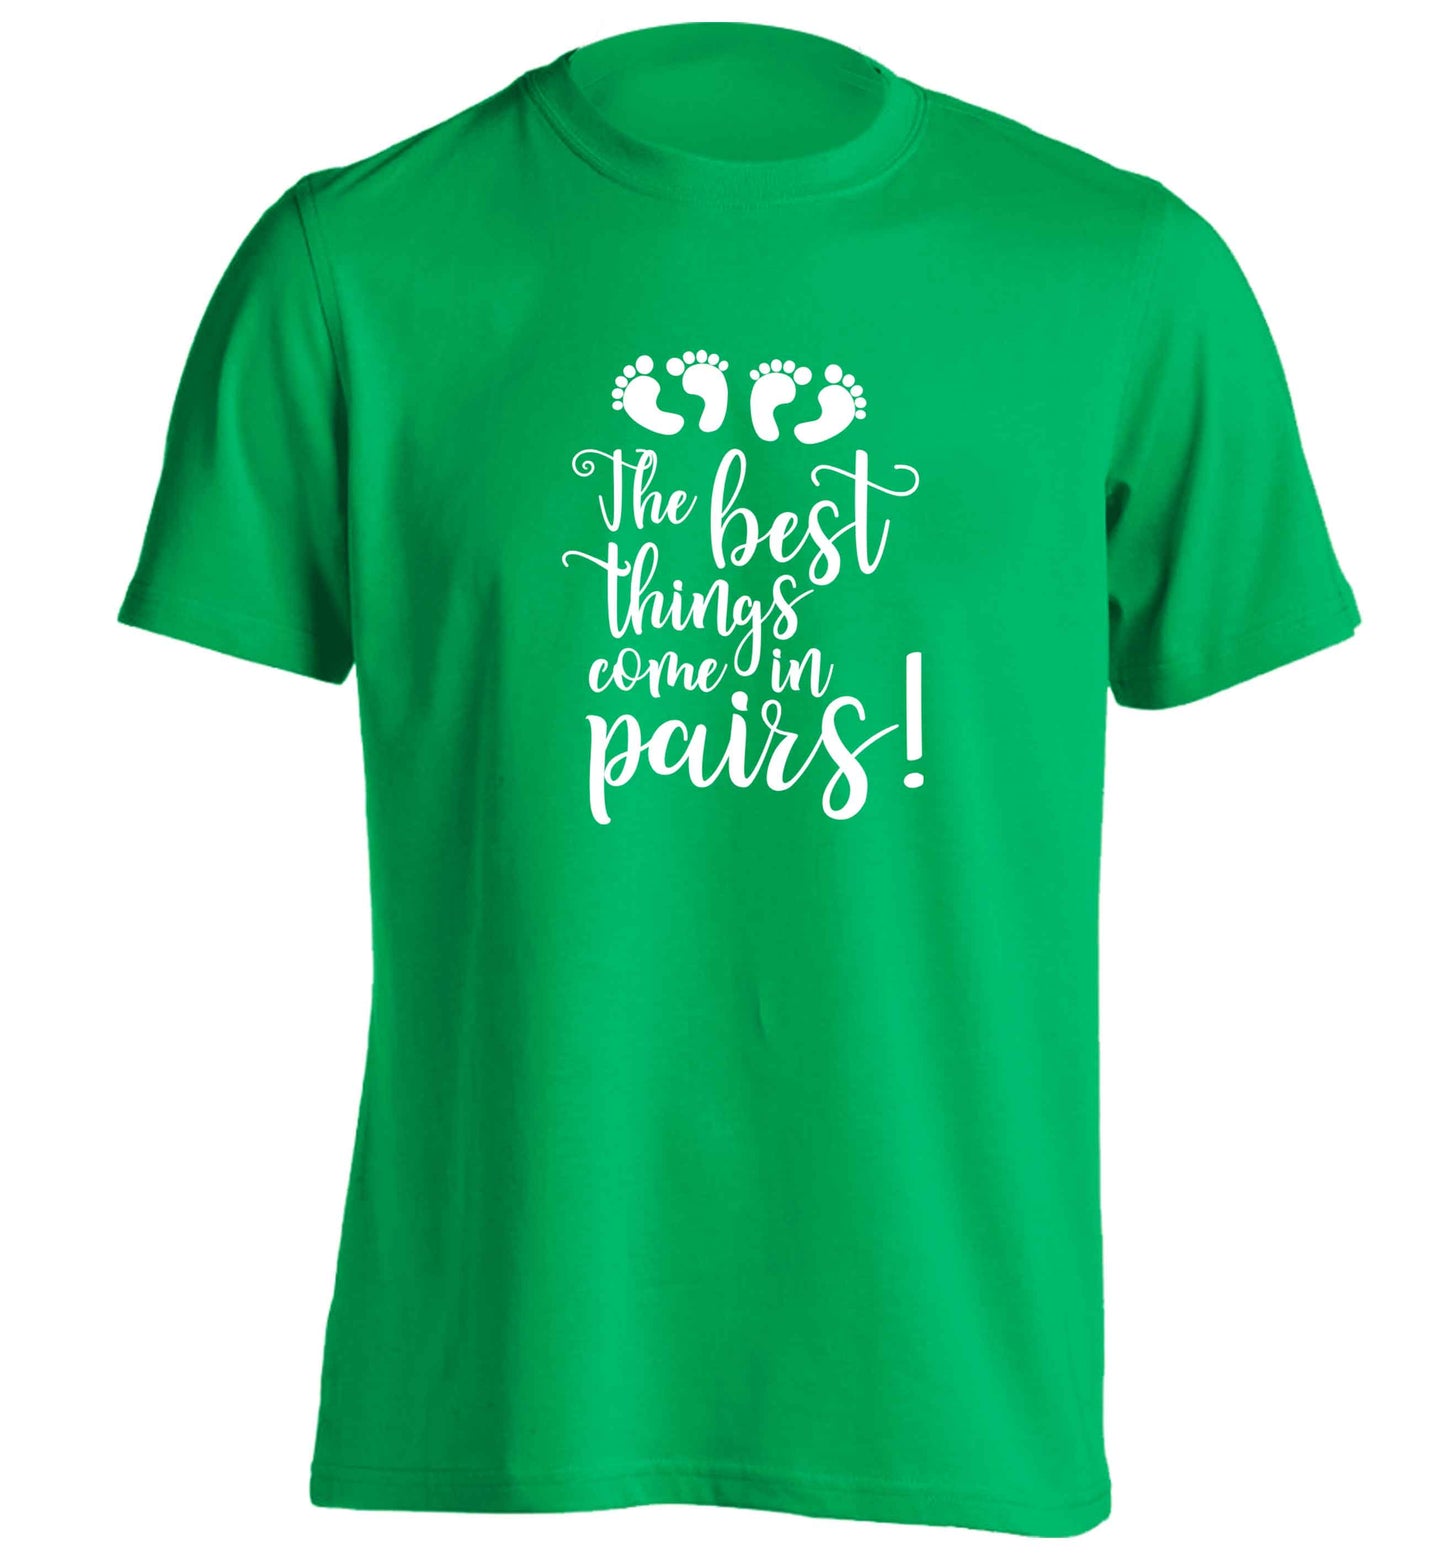 The best things come in pairs! adults unisex green Tshirt 2XL